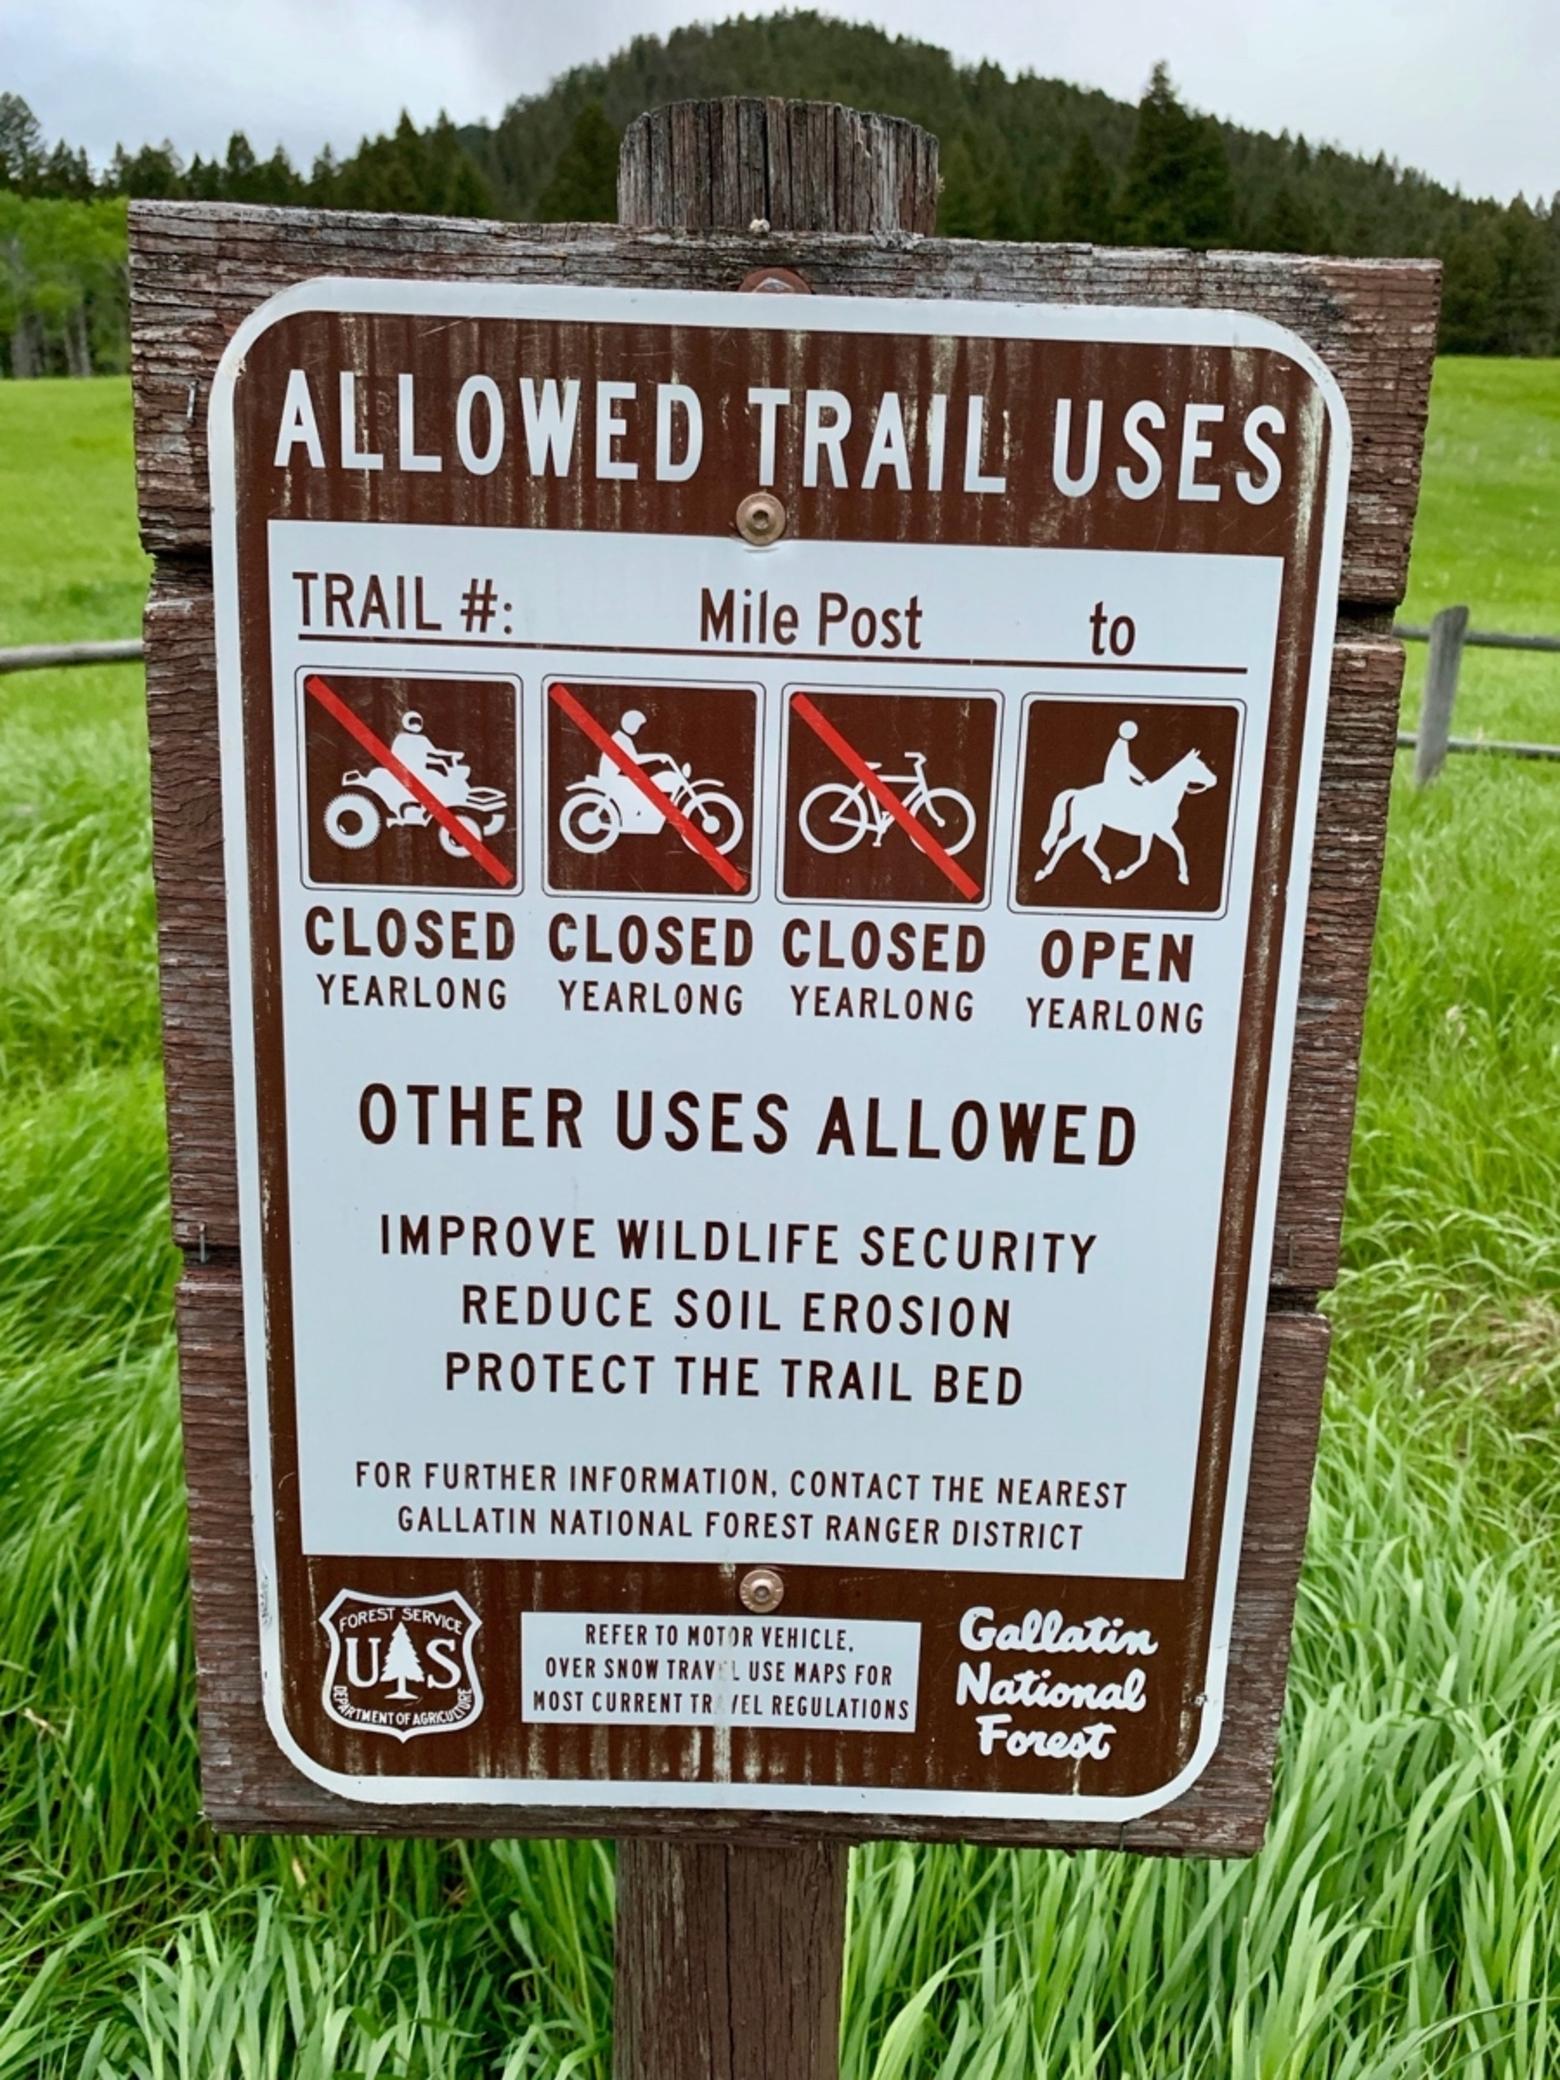 A sign at a Custer-Gallatin National Forest trailhead on the east side of the Madison Mountains and an entryway to the Lee Metcalf Wilderness.  One of the reasons cited for yearlong closures of mechanized vehicles is to "improve wildlife security."  Mountain Journal photo.